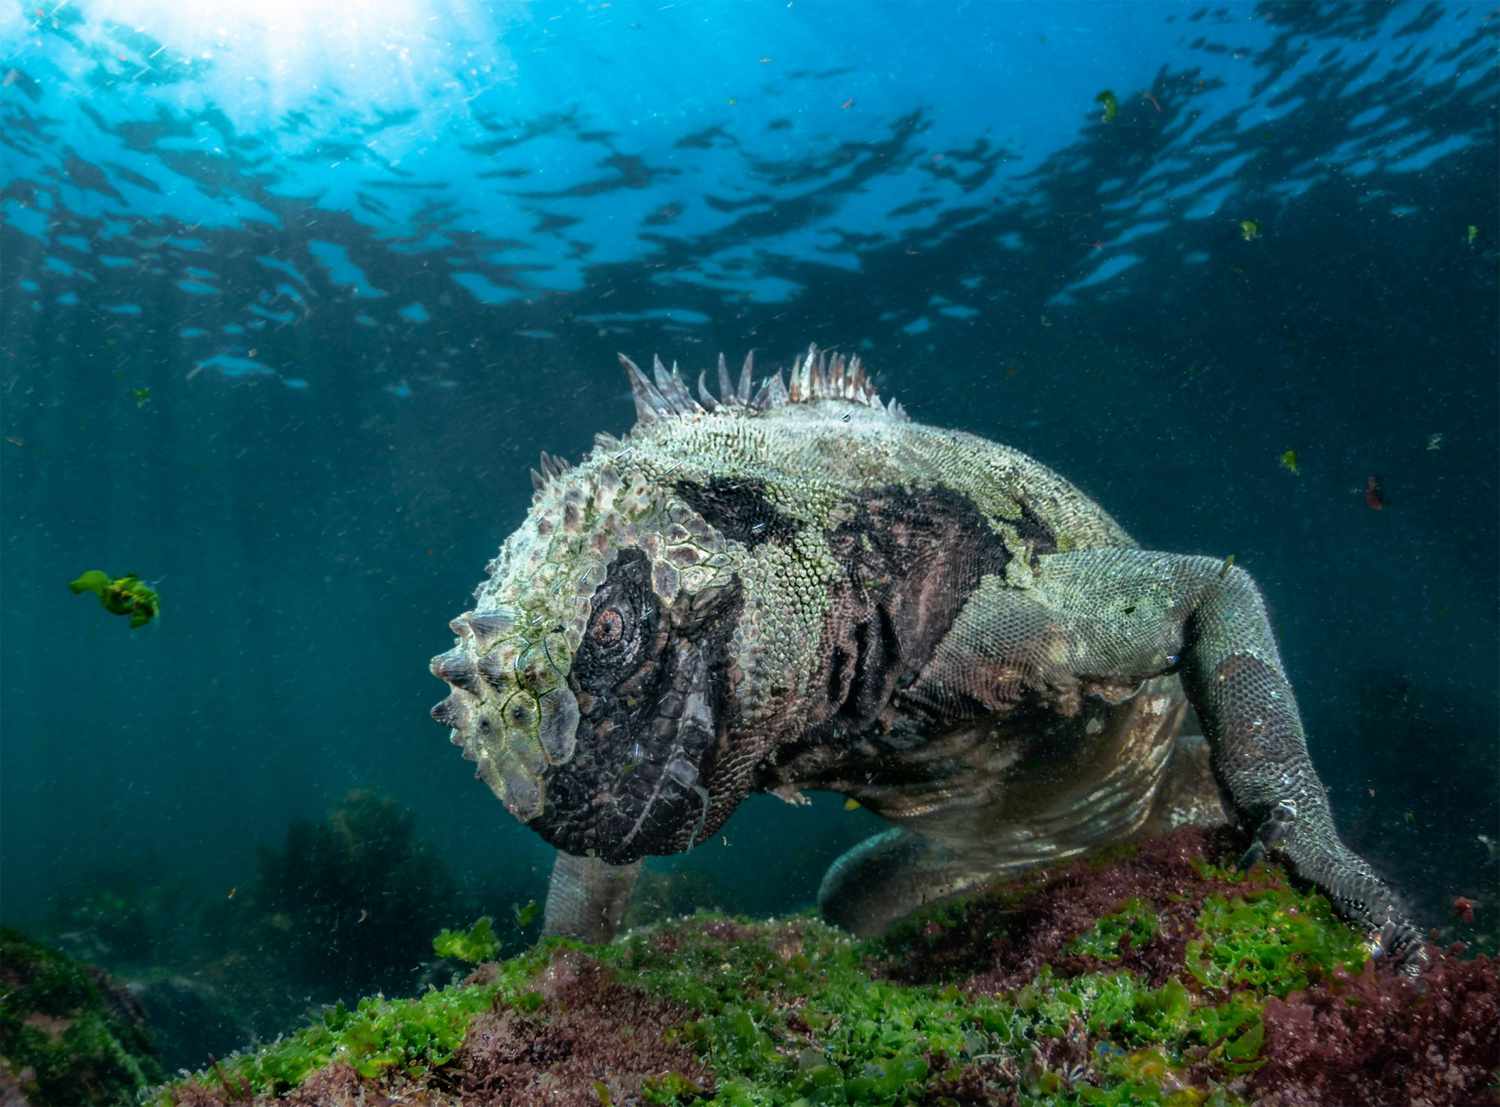 The Big Picture 2019 From the beautiful to the bizarre, this photographic showcase of life on Earth shines a light on some of our planet's most amazing species and places.